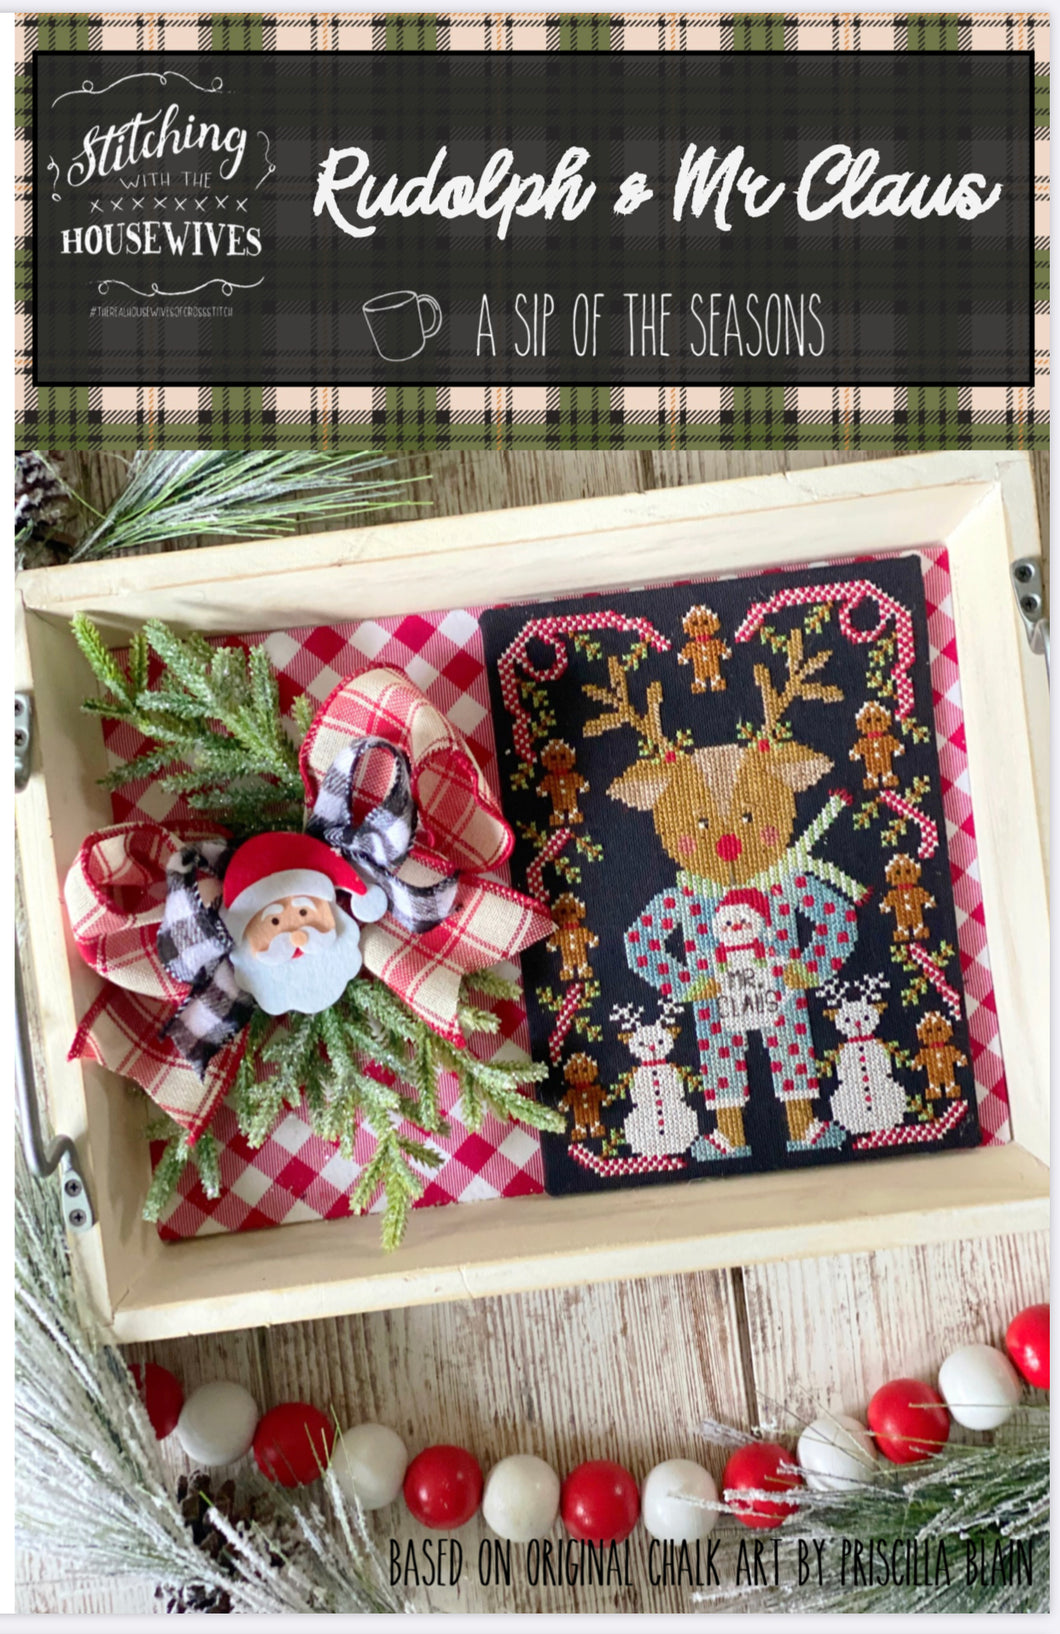 Rudolph & Mrs. Claus by Stitching With the Housewives